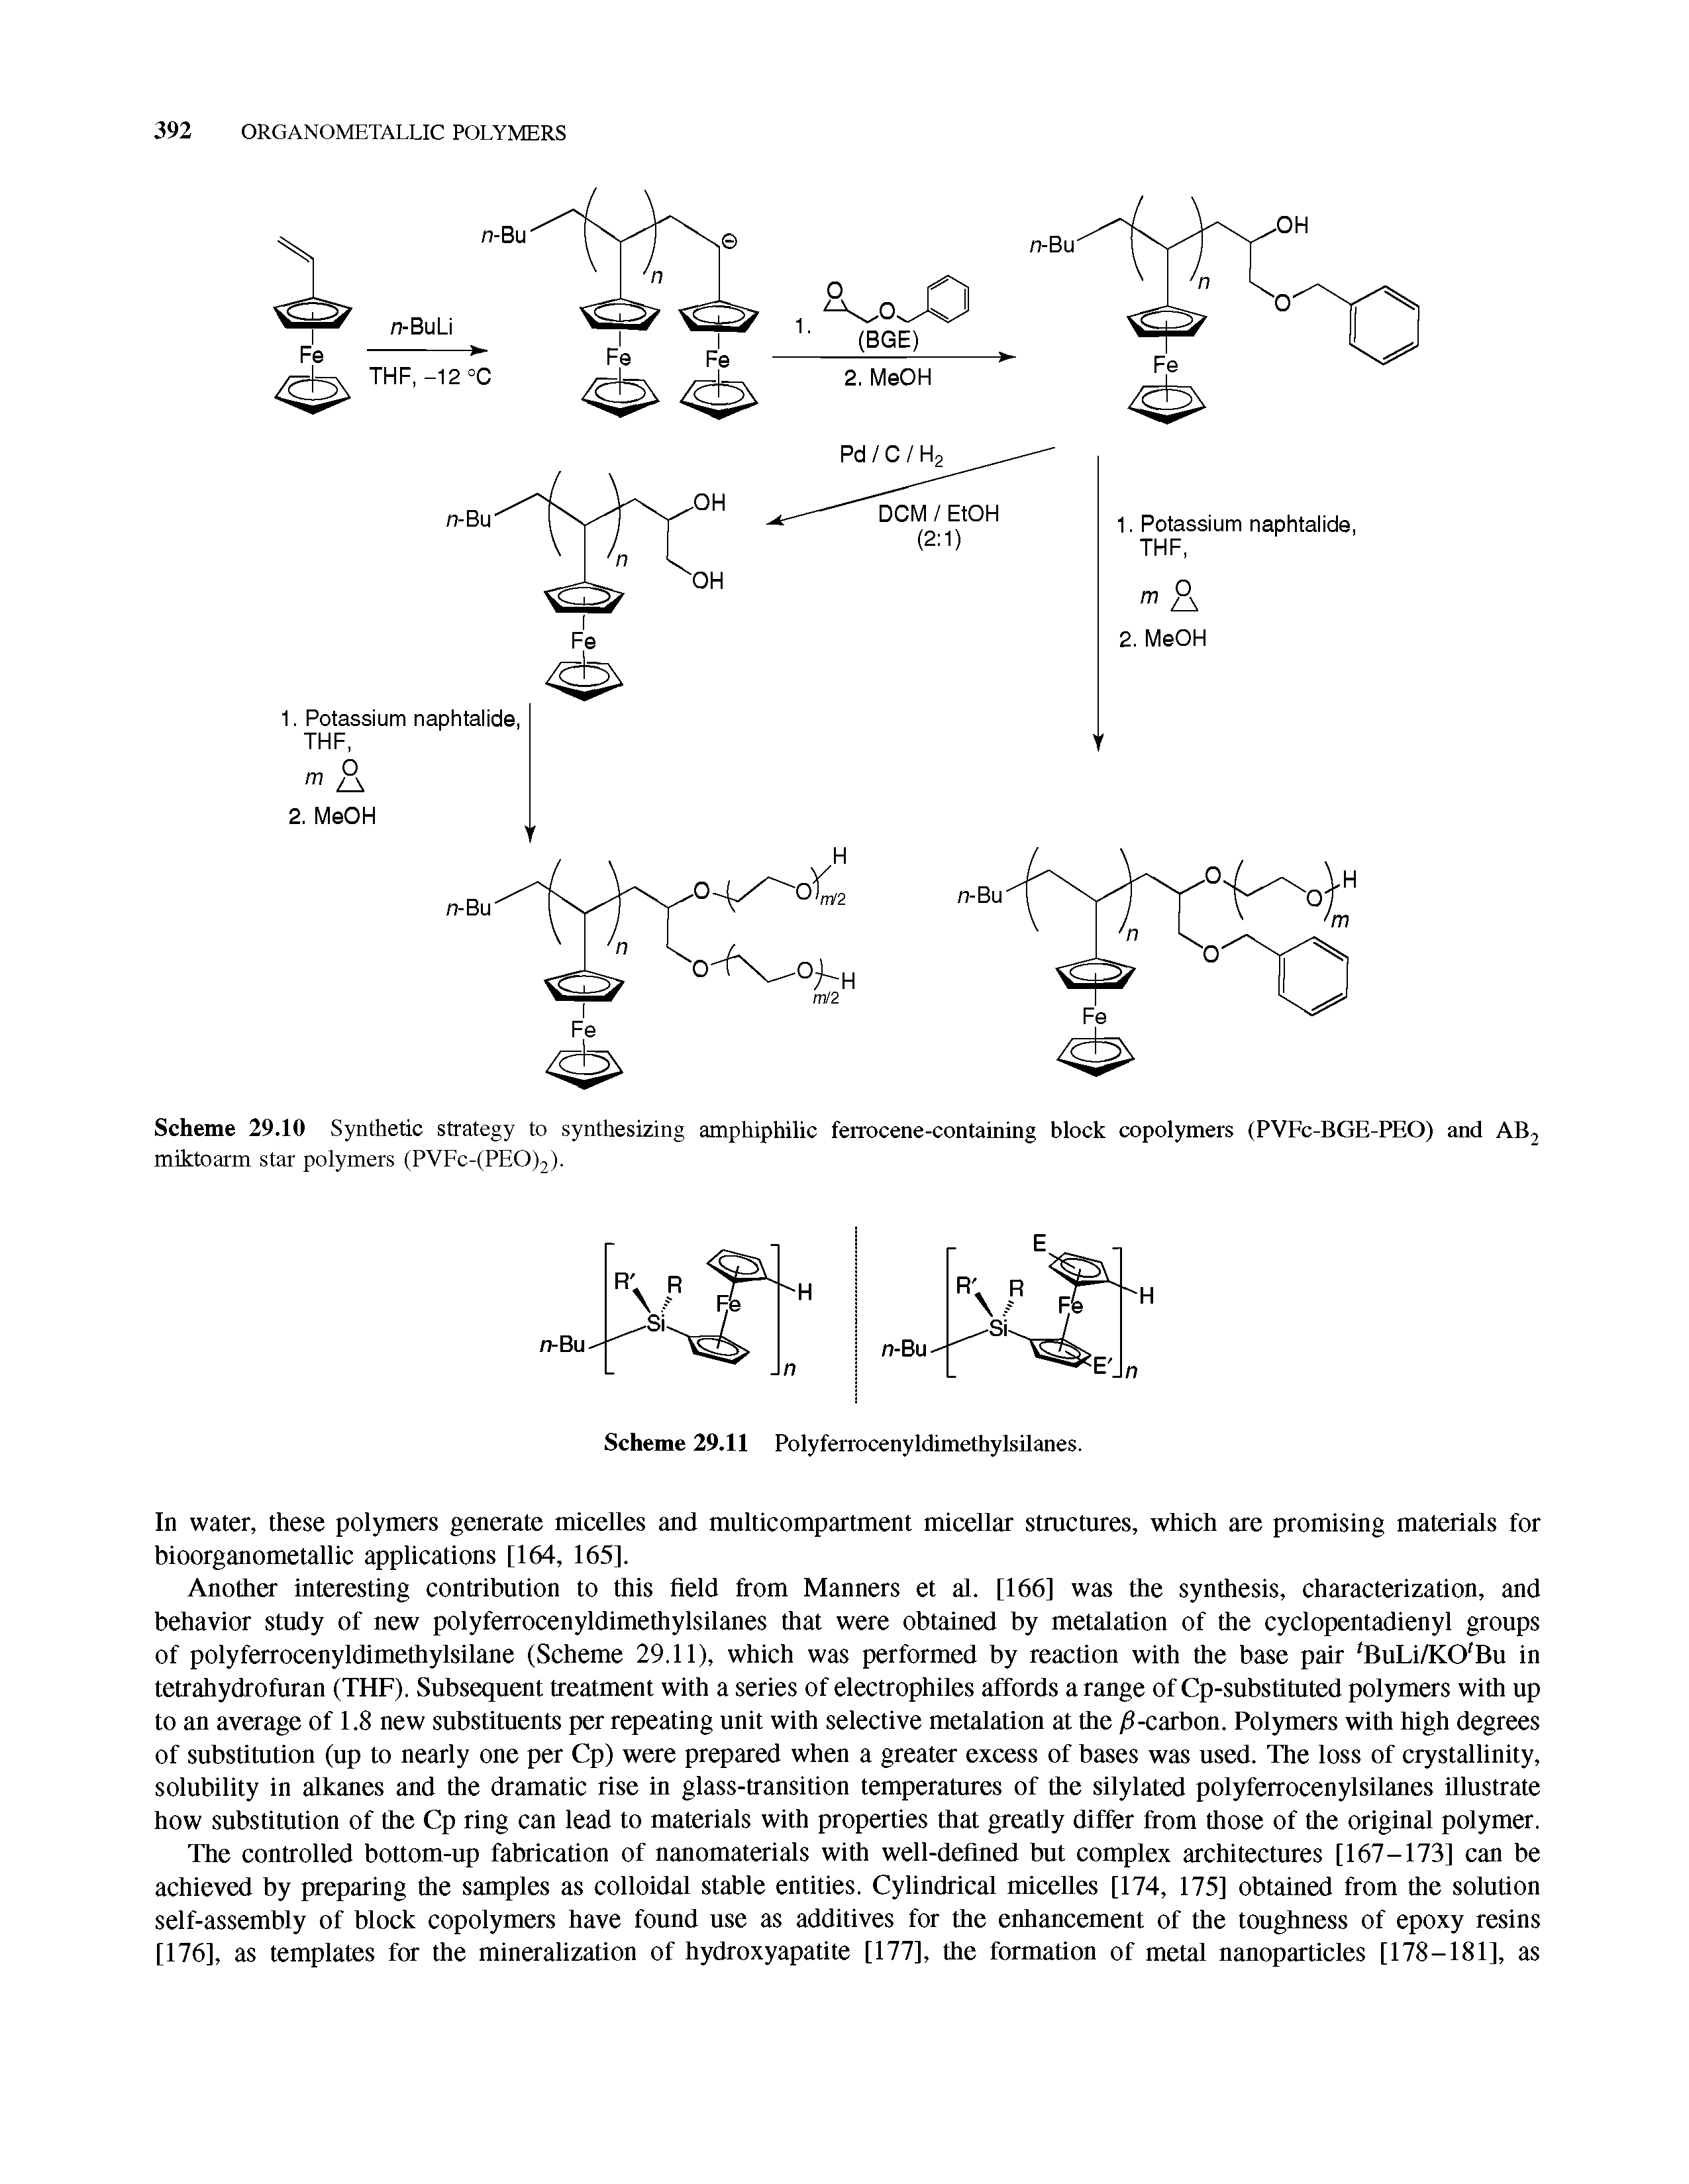 Scheme 29.10 Synthetic strategy to synthesizing amphiphilic ferrocene-containing block copolymers (PVFc-BGE-PEO) and ABj miktoarm star polymers (PVFc-(PEO)2).